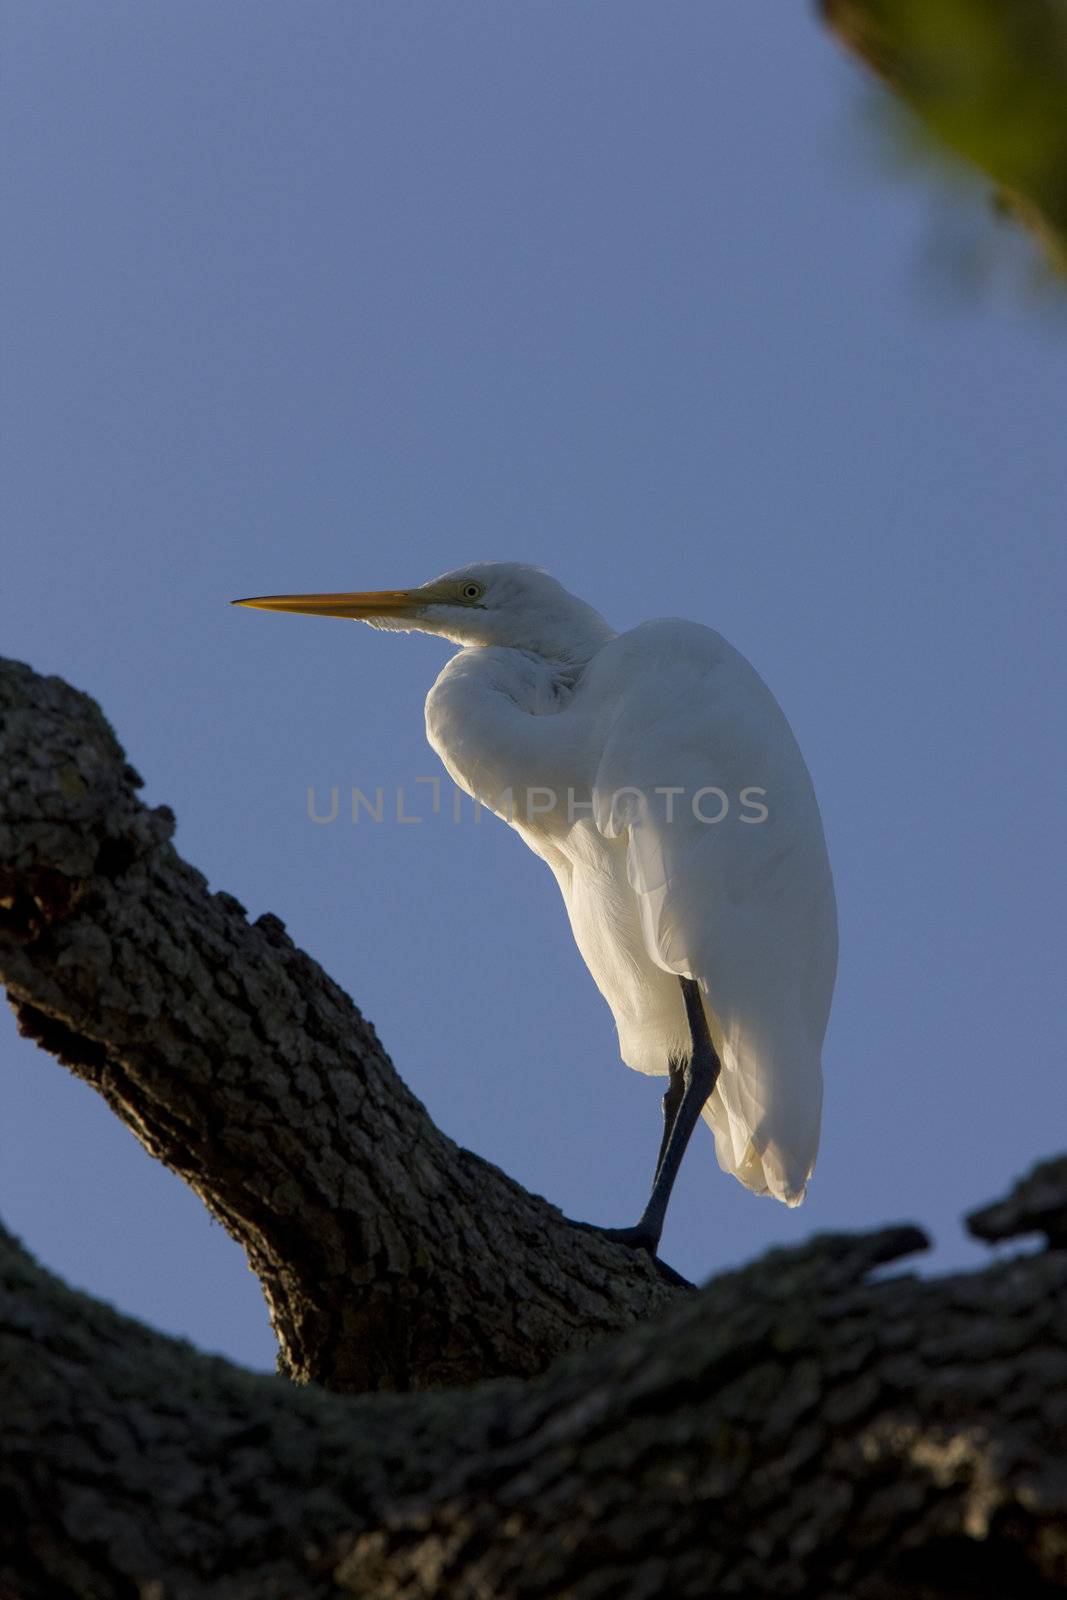 Great White Egret perched in Florida tree by pictureguy